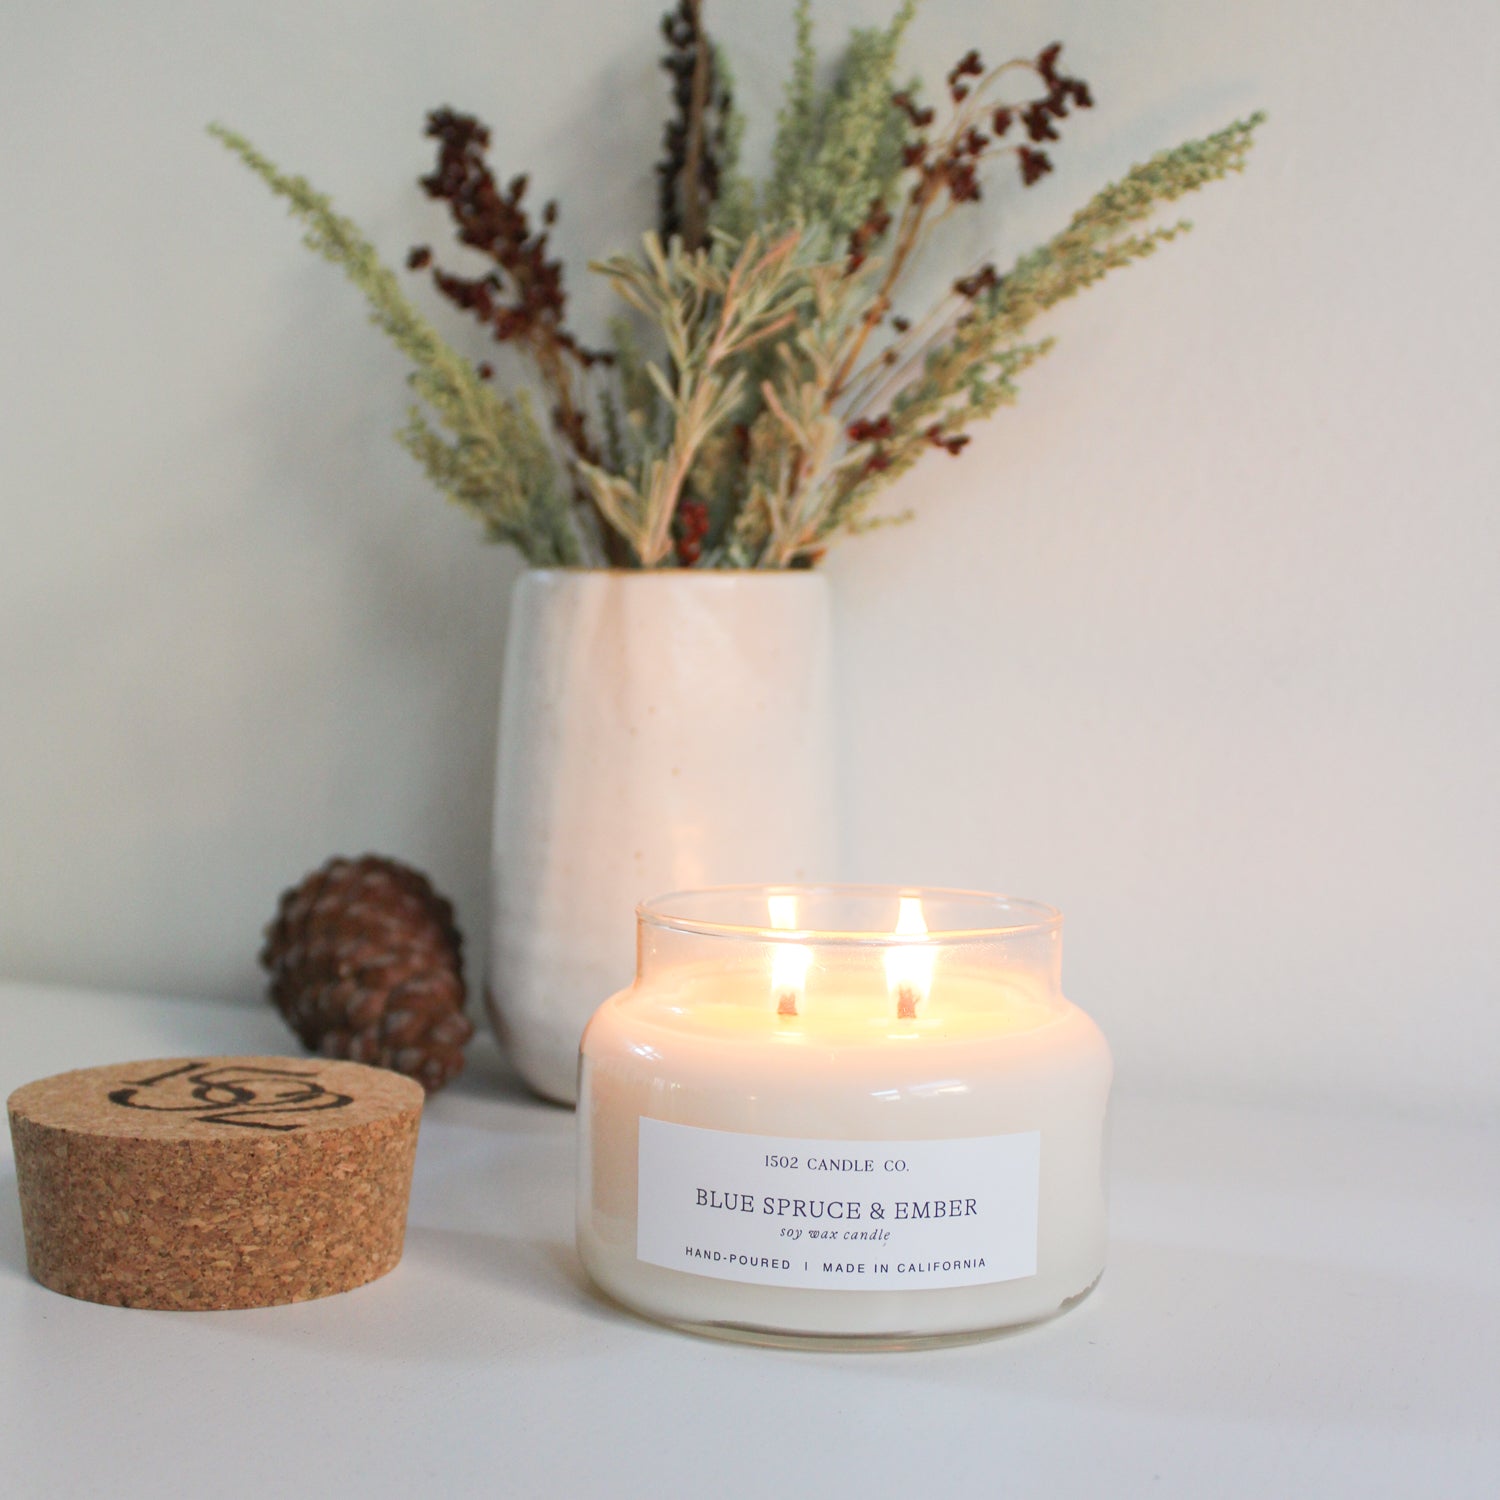 Blue spruce and ember candle for the holidays.